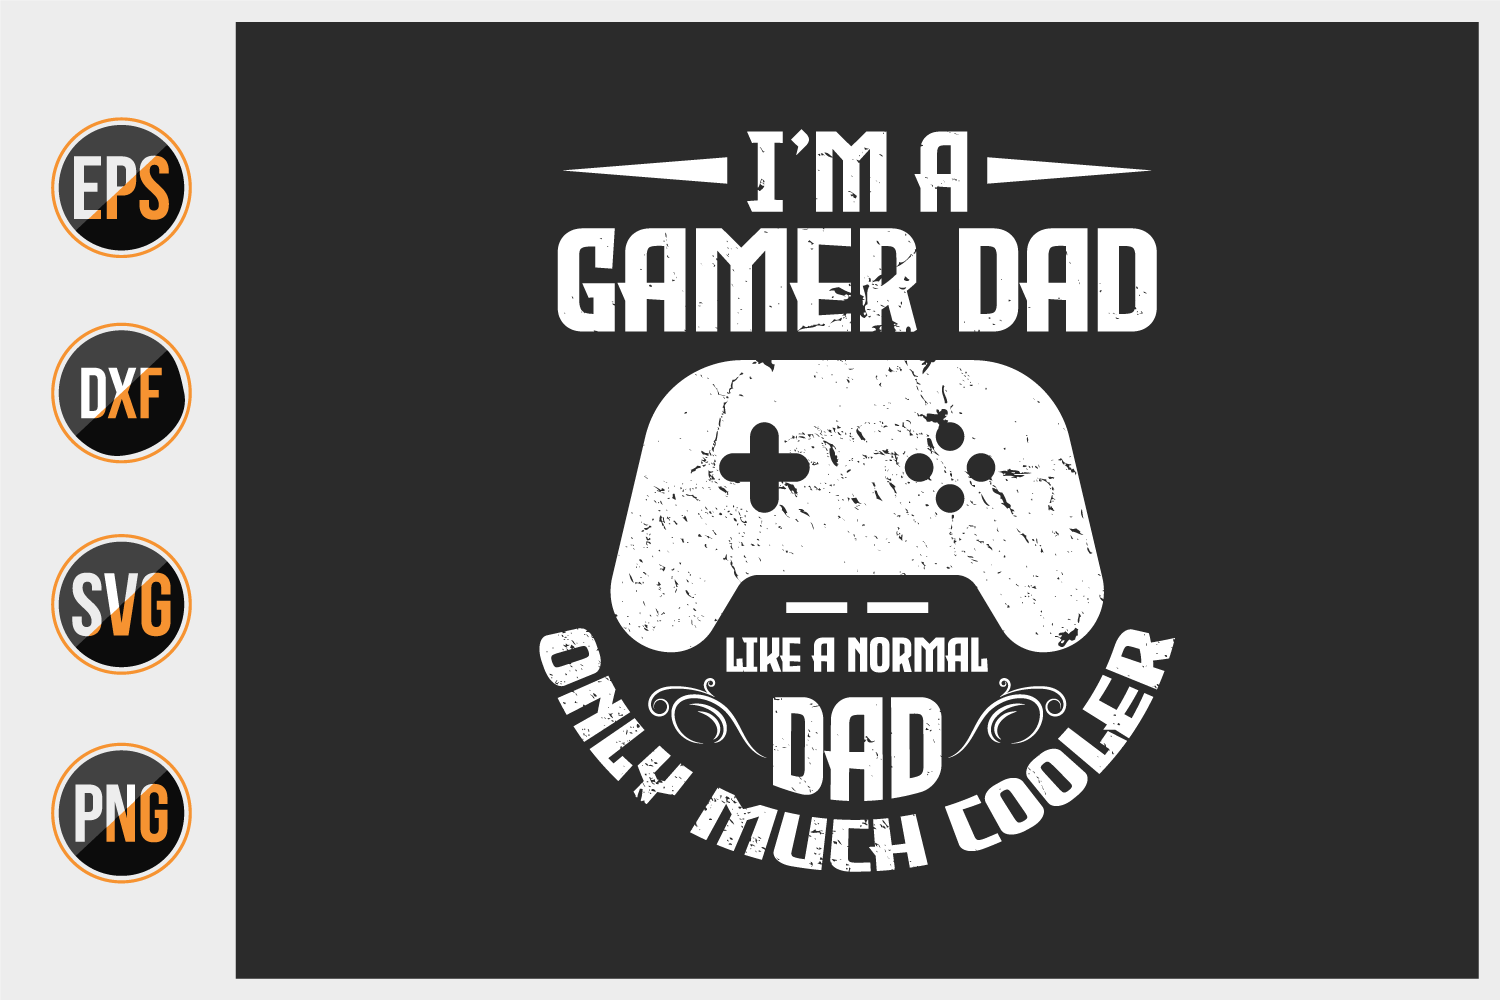 Your dad like. Gamer dad. Gamer dad logo. Only dad. Only dad блогер.